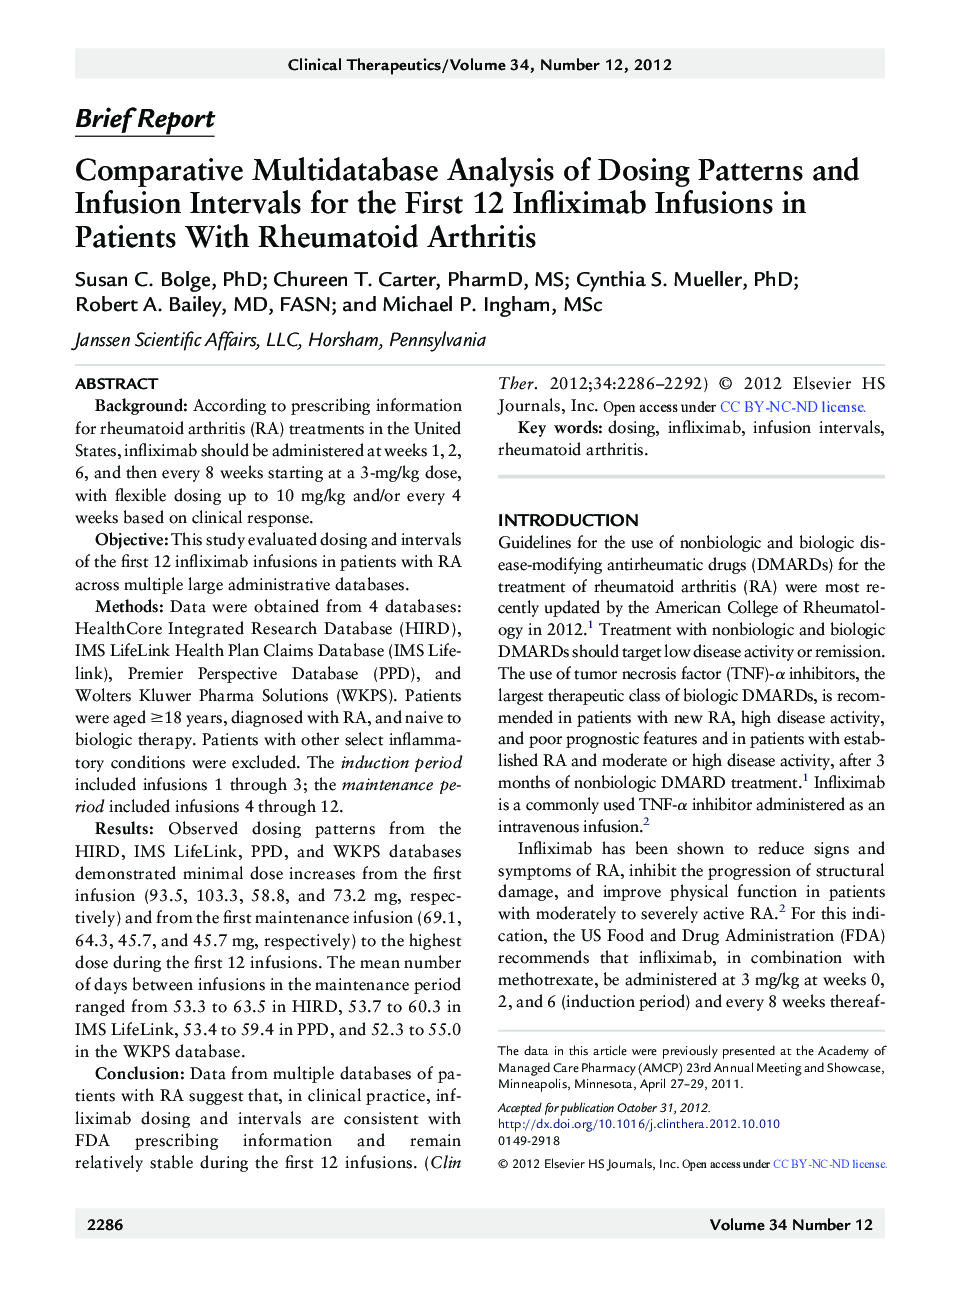 PharmacotherapyBrief reportComparative Multidatabase Analysis of Dosing Patterns and Infusion Intervals for the First 12 Infliximab Infusions in Patients With Rheumatoid Arthritis